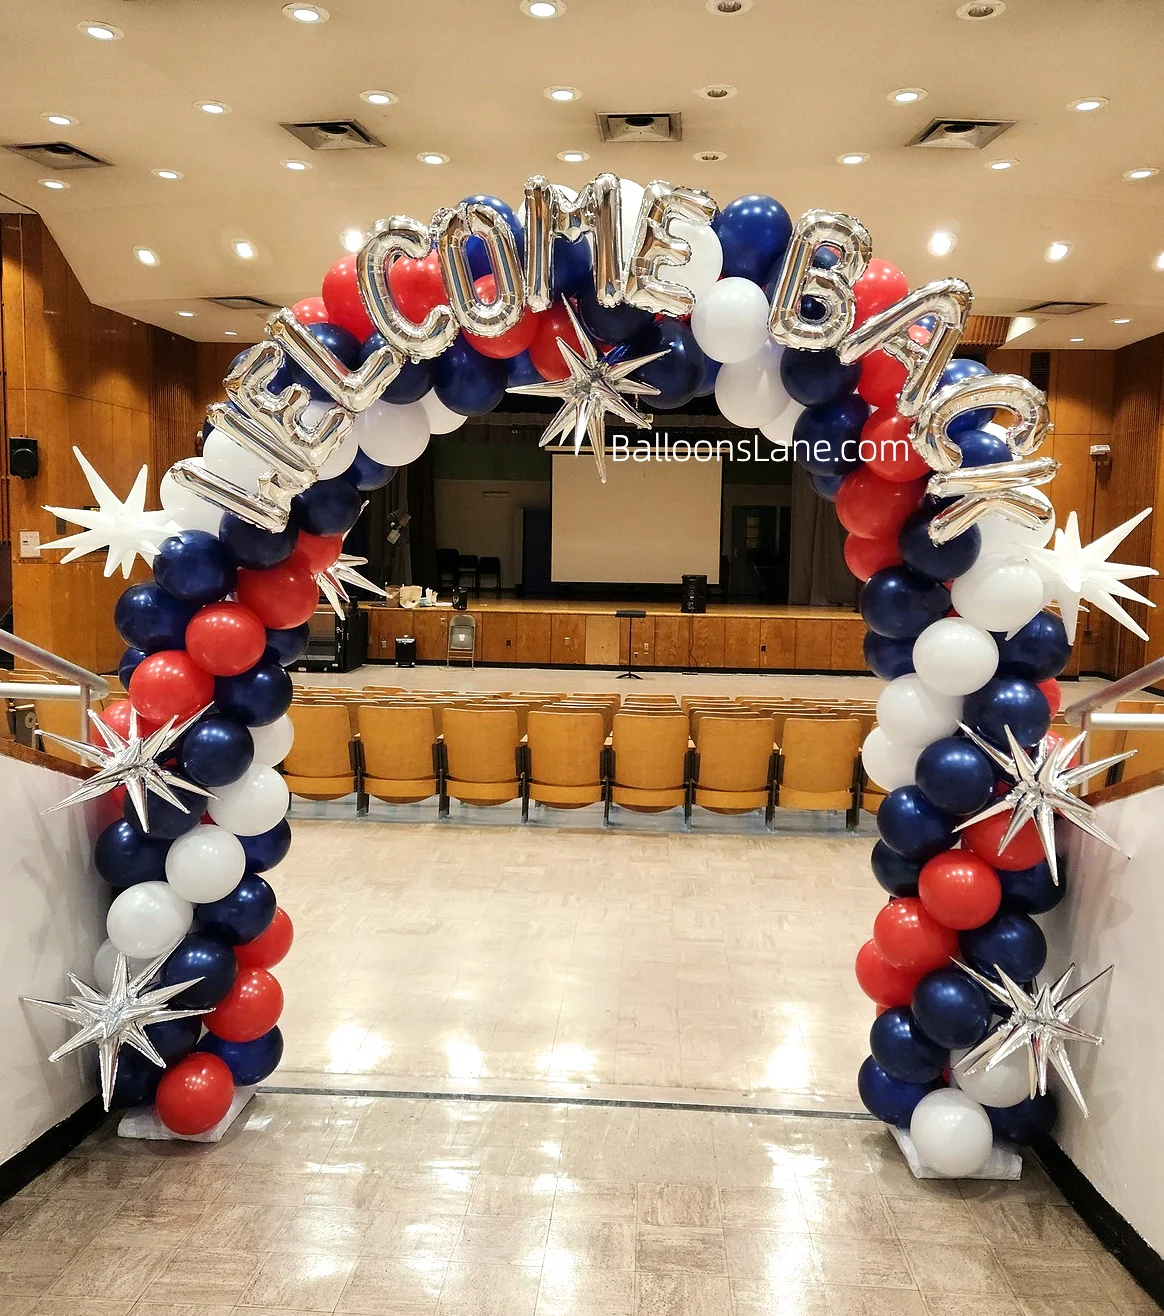 Arch made of blue, white, and blue latex balloons, with Mylar star and letter balloons, along with matching color letter balloons.